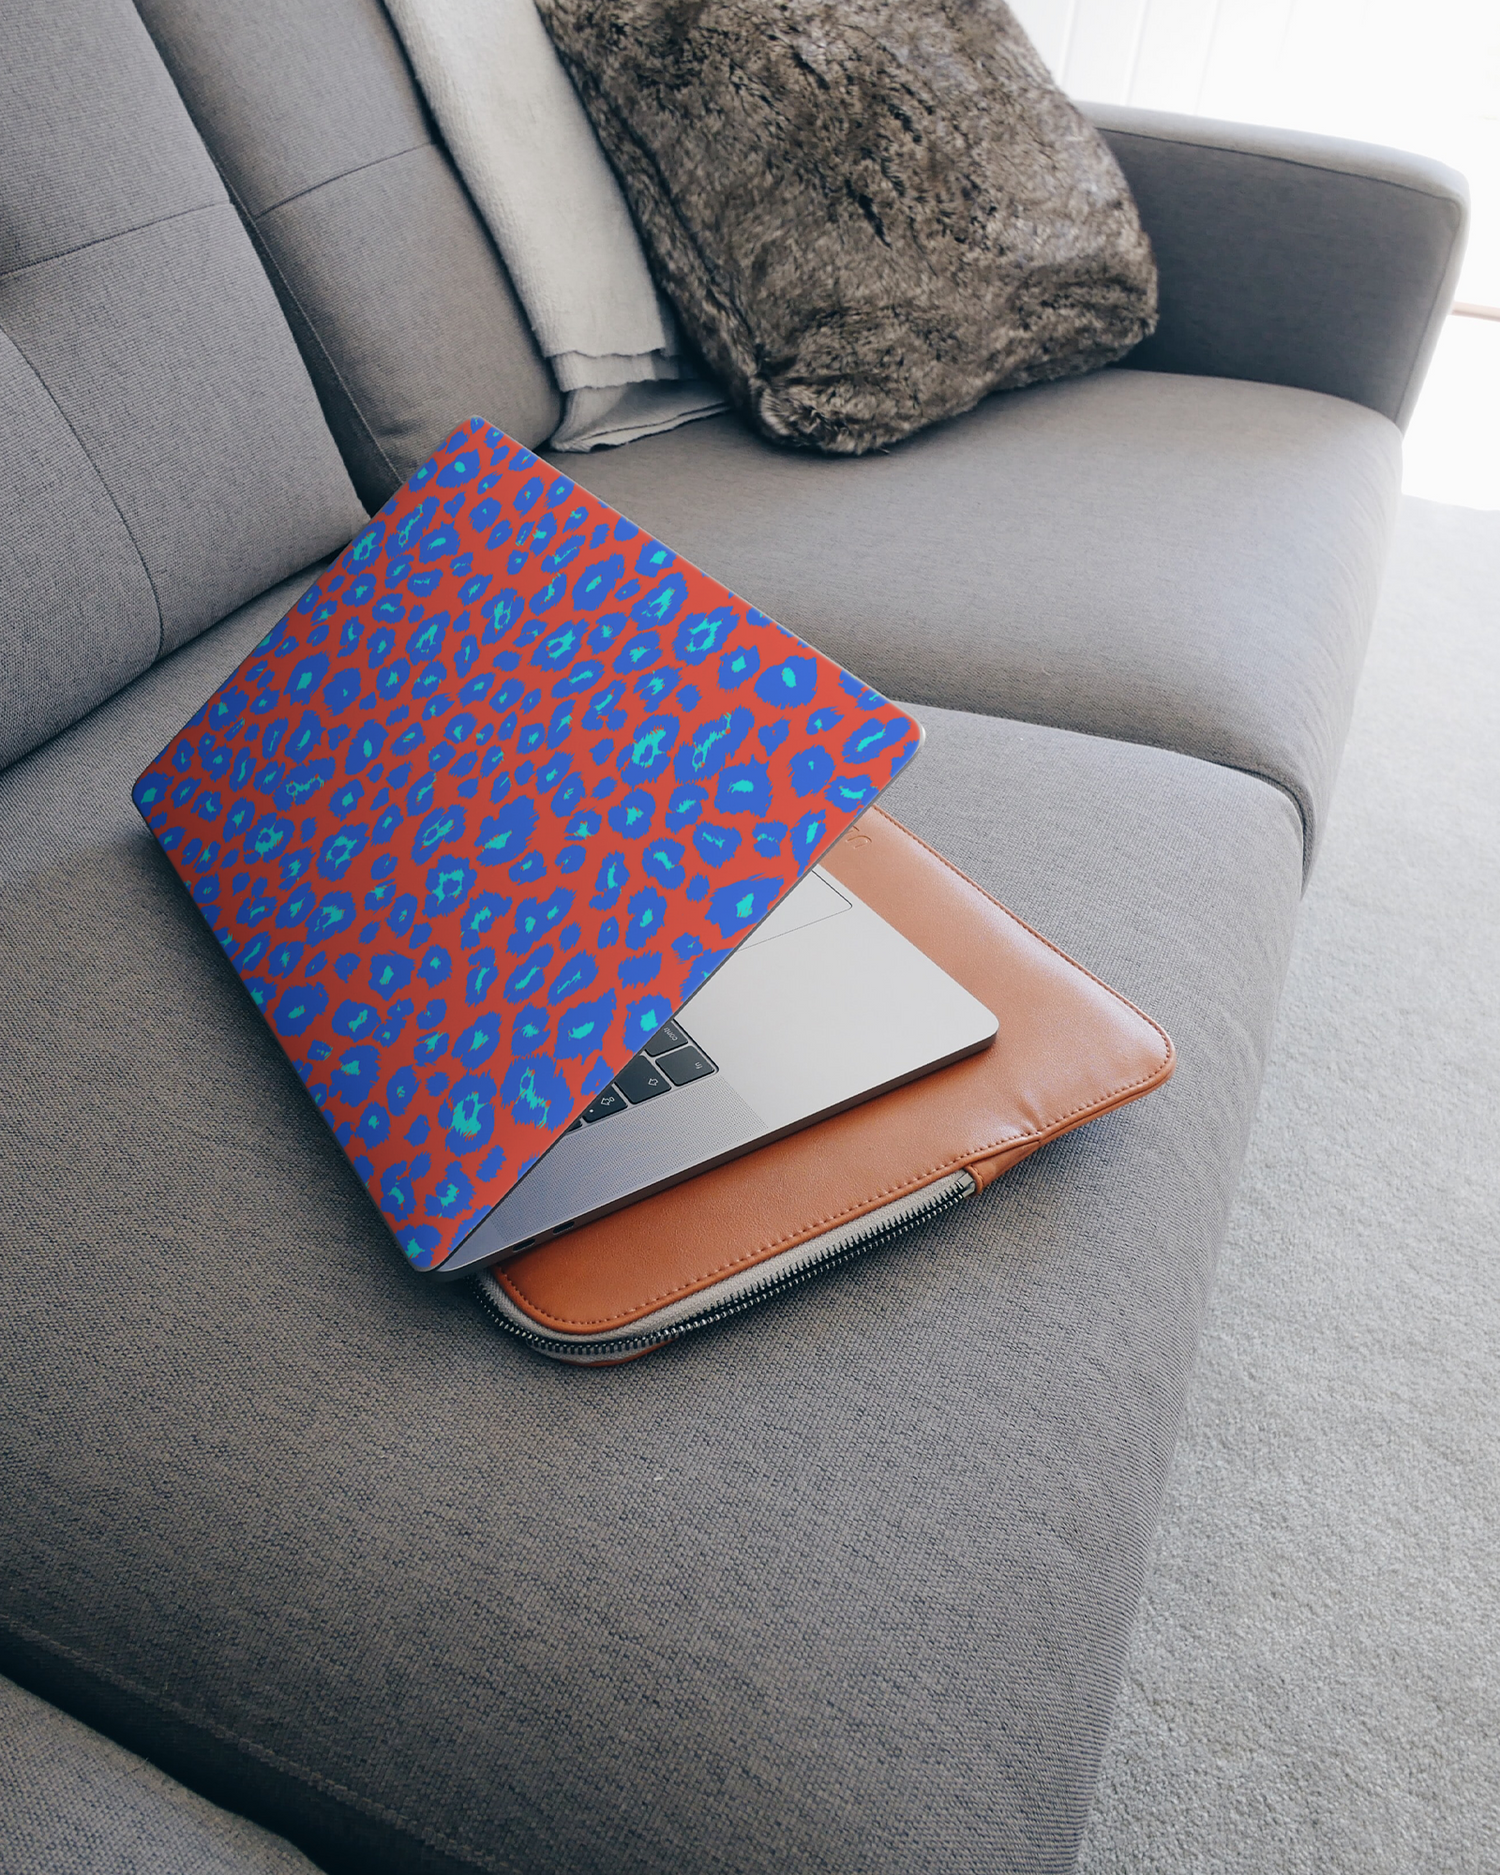 Bright Leopard Print Laptop Skin for 15 inch Apple MacBooks on a couch